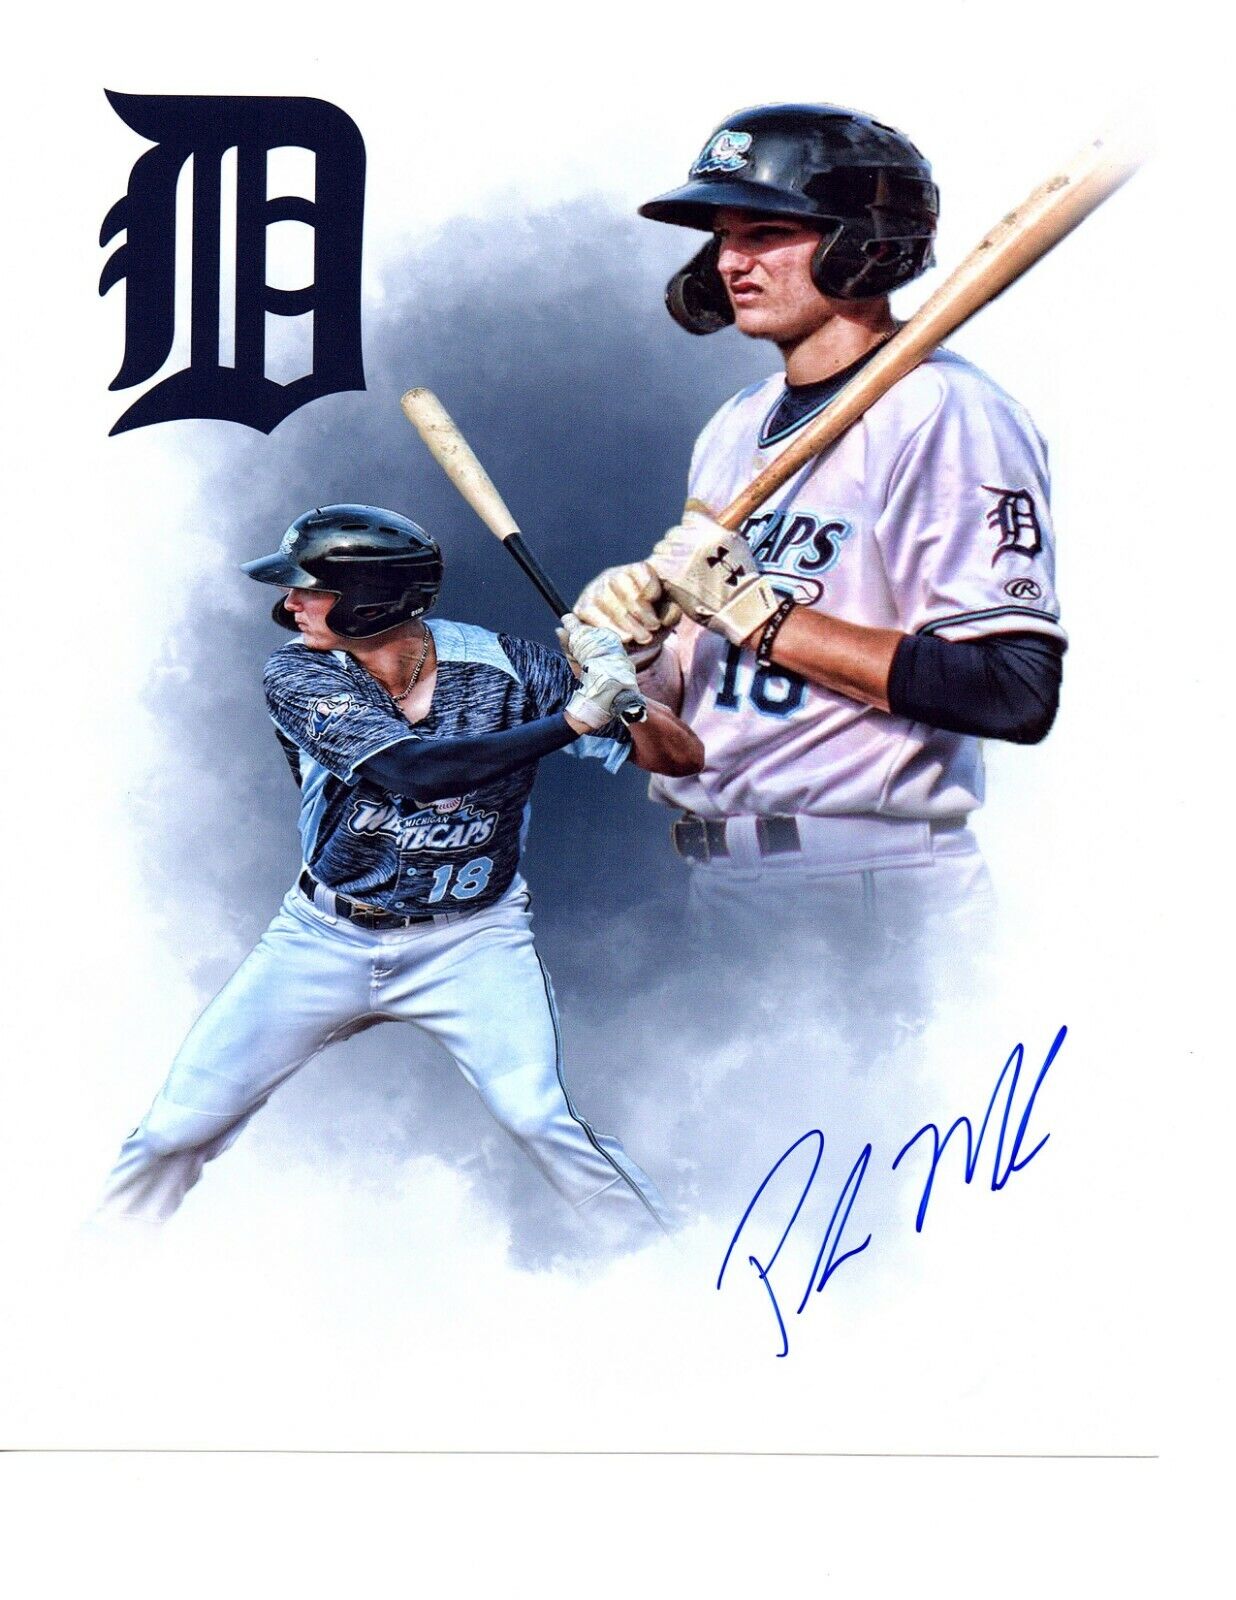 Parker Meadows Detroit Tigers prospect autographed signed 8x10 baseball Photo Poster painting